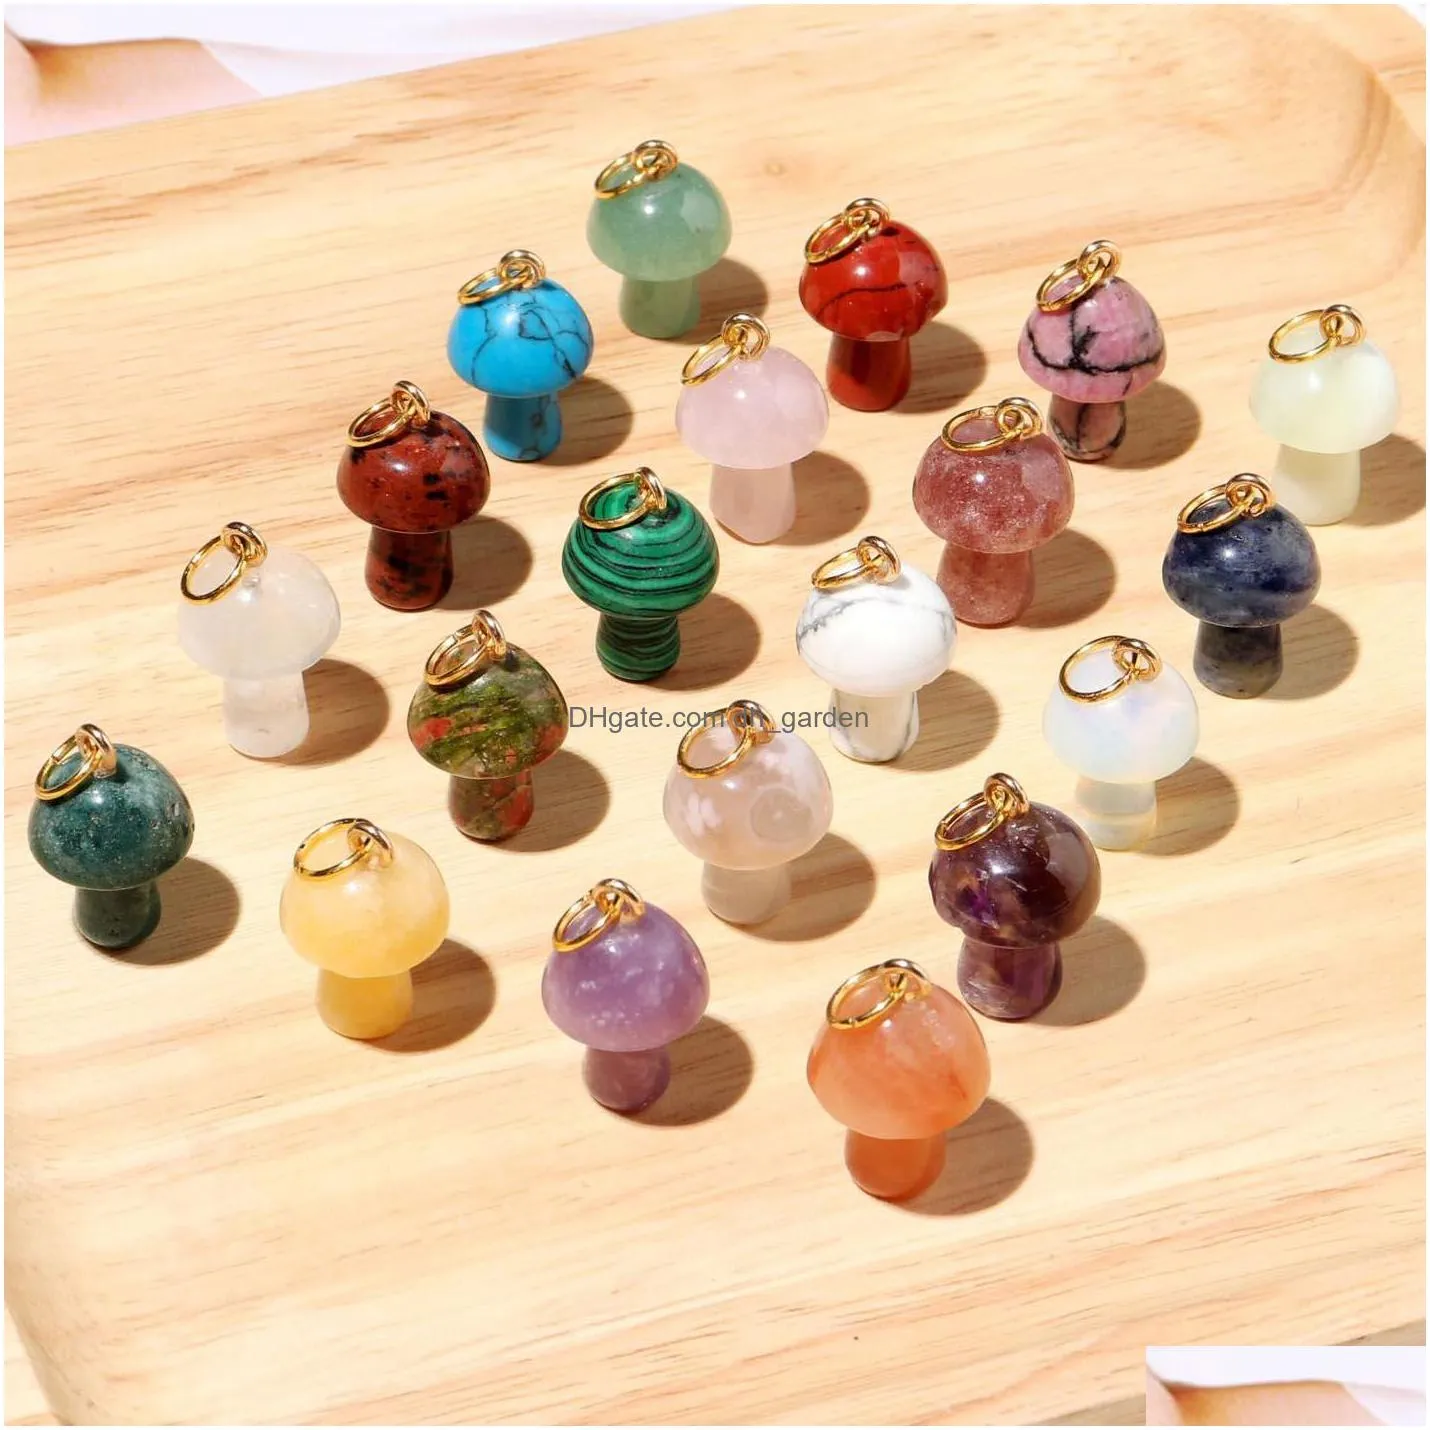 2cm mushroom statue natural crystal stone carving charms reiki healing gold pendant for women jewelry making wholesale